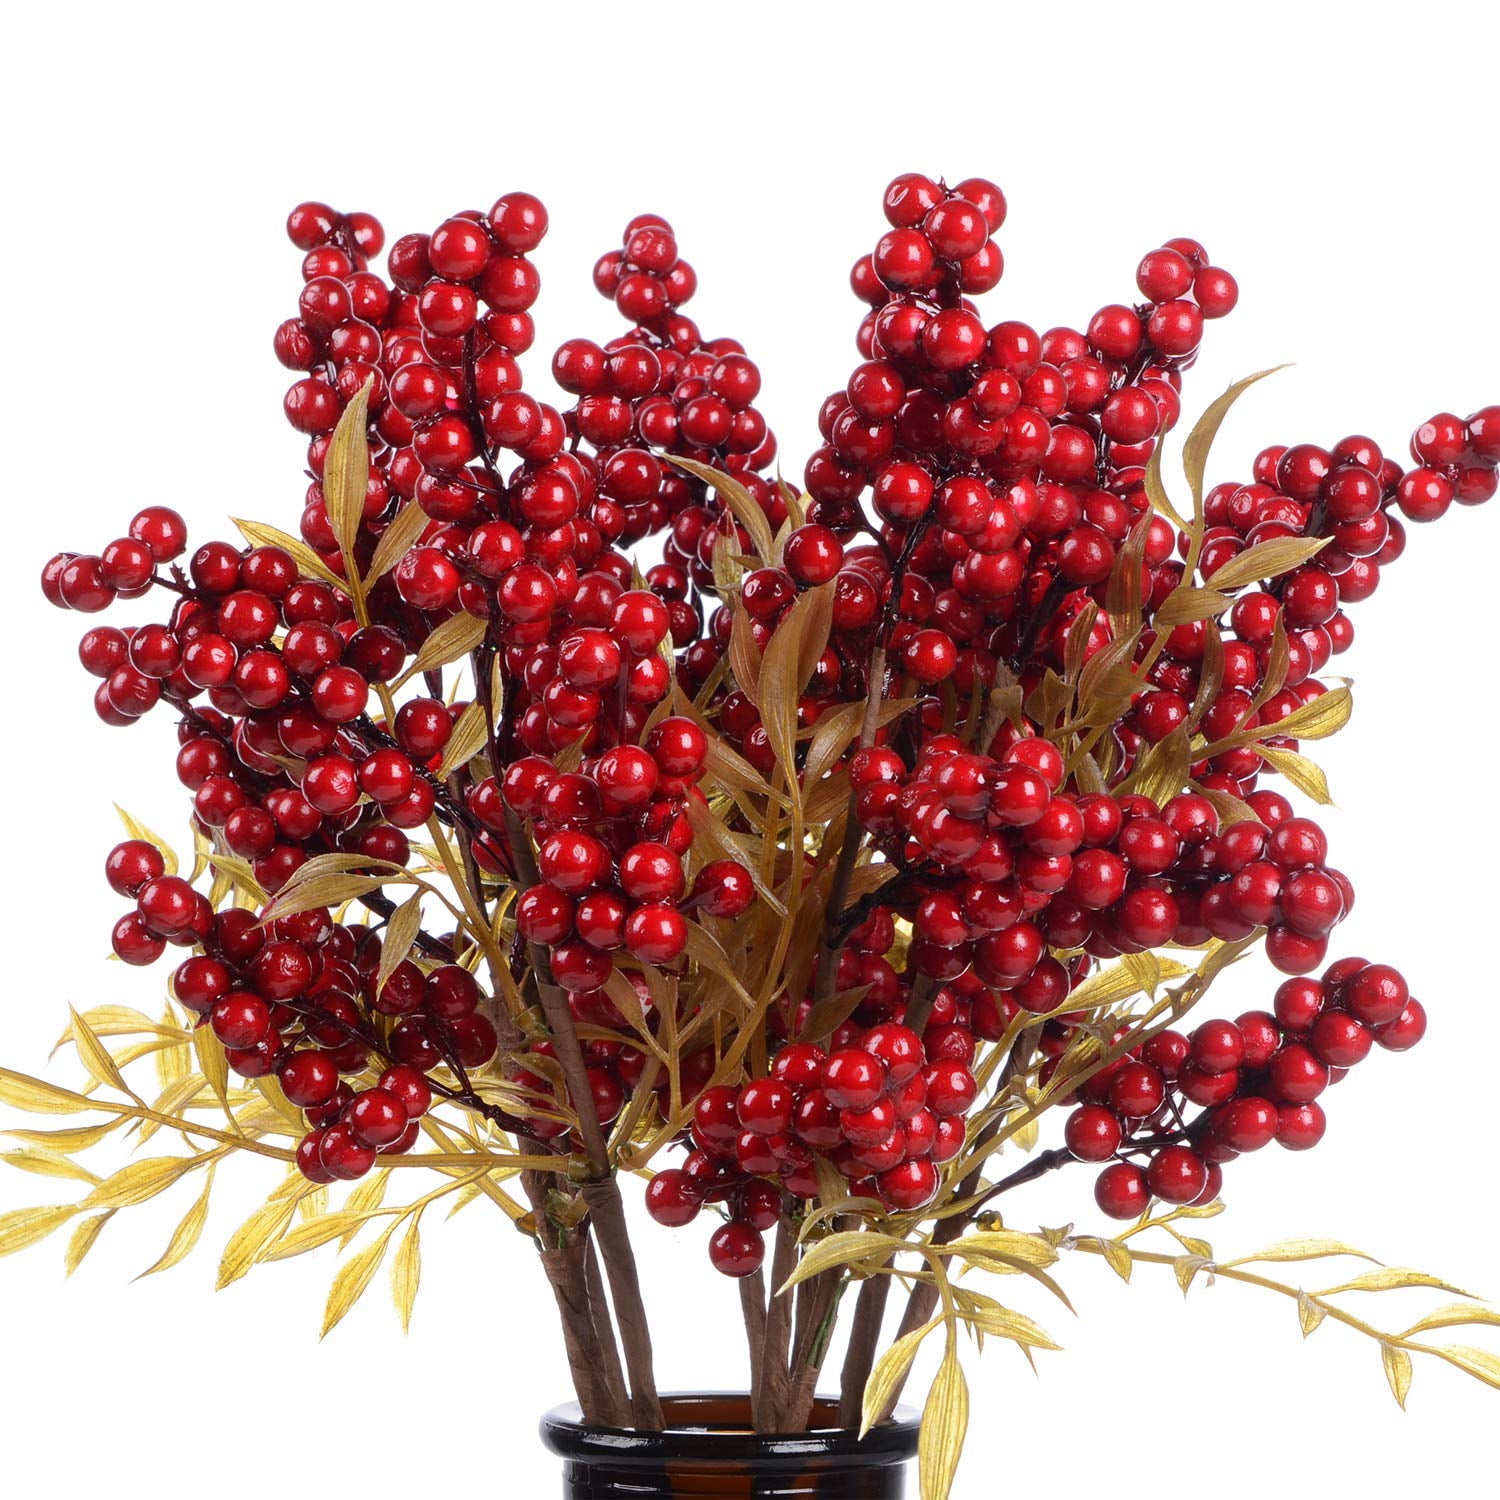 CHDHALTD 5pcs Wedding Party Christmas Berry Artificial Red Berry Stems Plastic Artificial Flowers for Christmas Tree Decorations